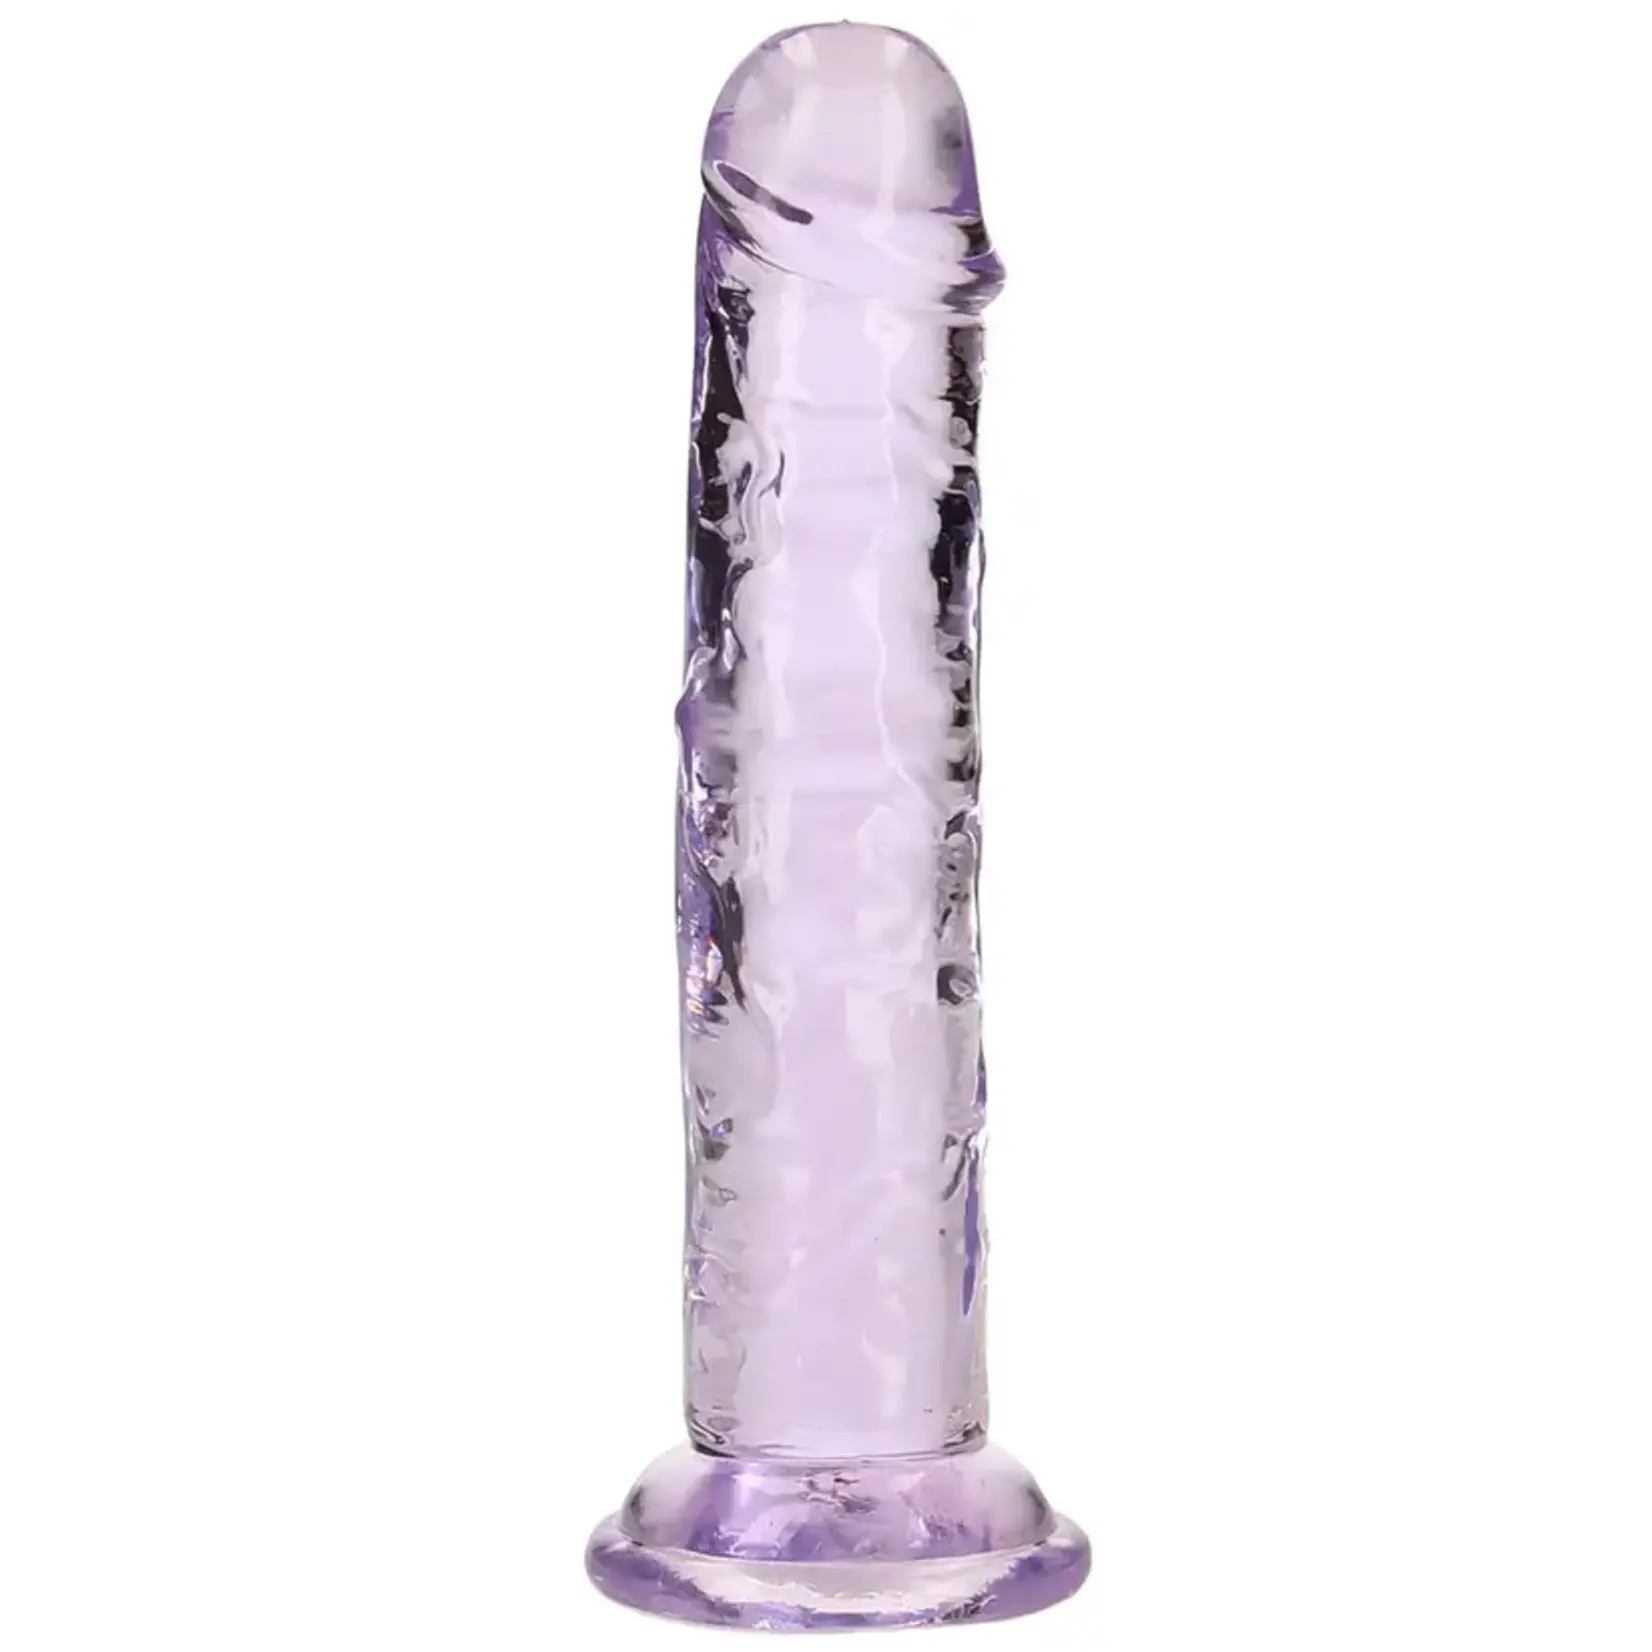 SHOTS REALROCK CRYSTAL CLEAR JELLY 6 INCH DILDO